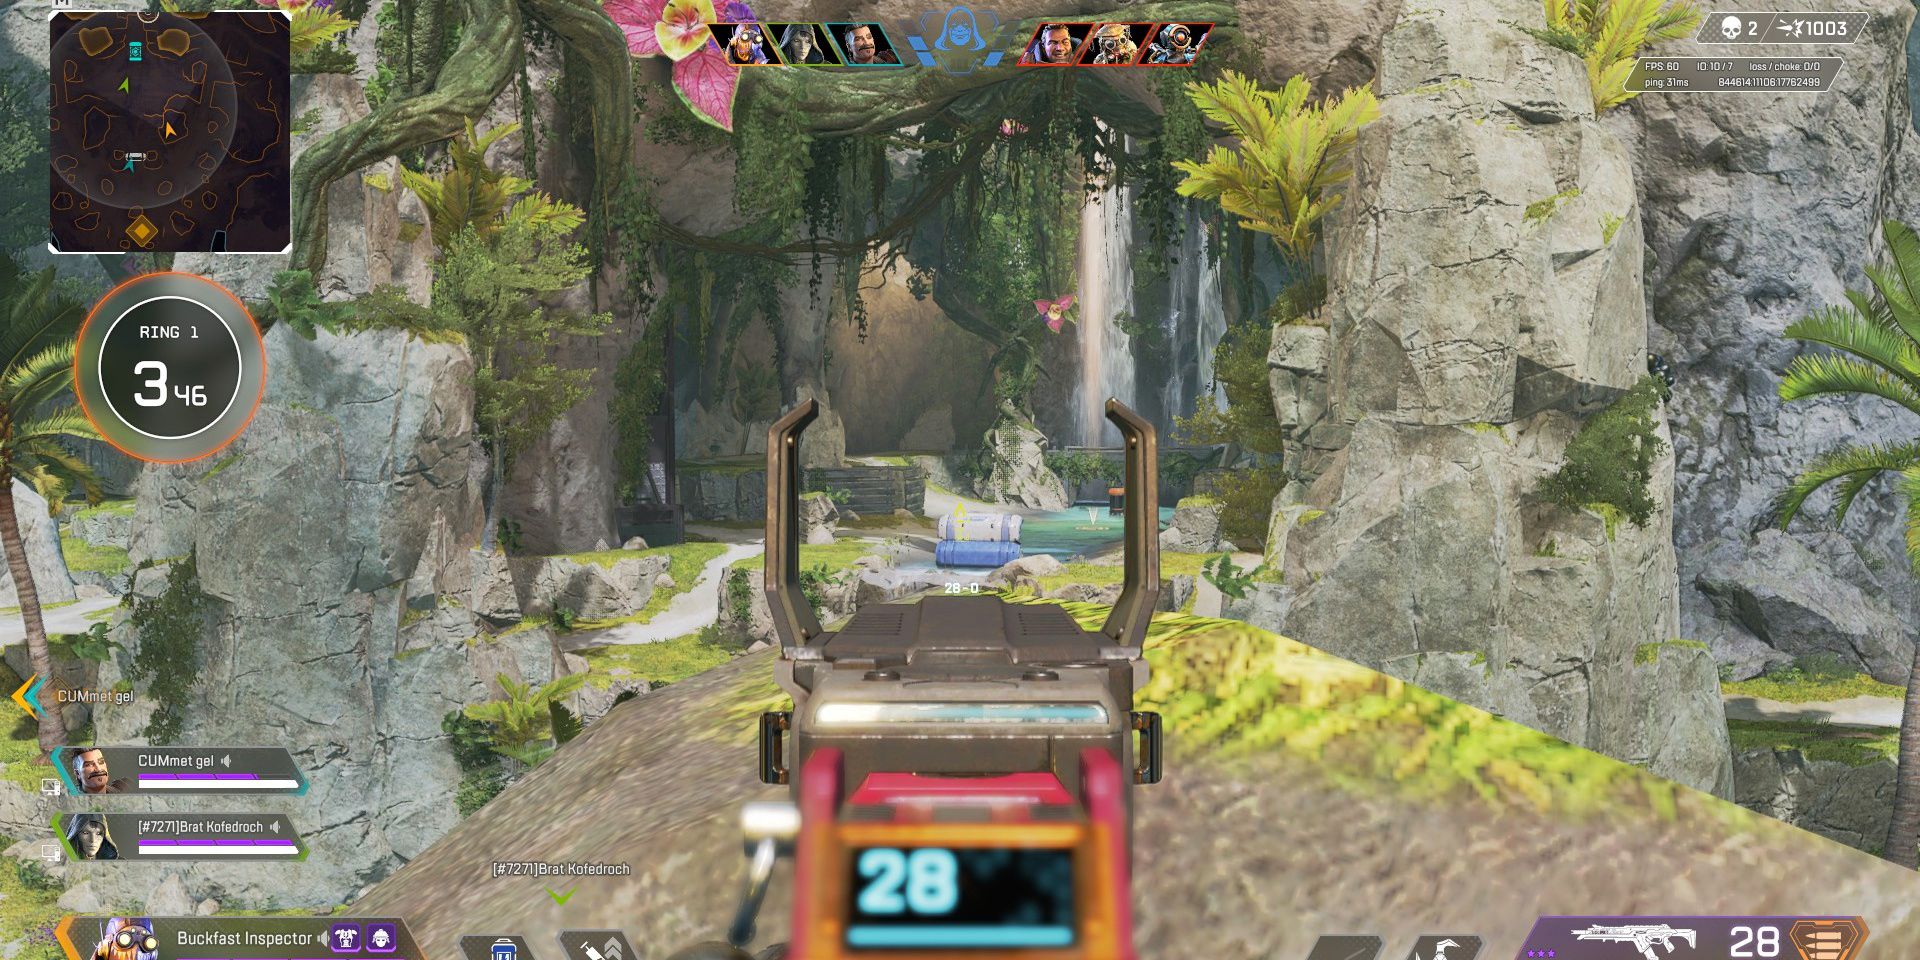 Octane aims down sights with the R301 rifle on top a large boulder on the Apex Legends map Habitat